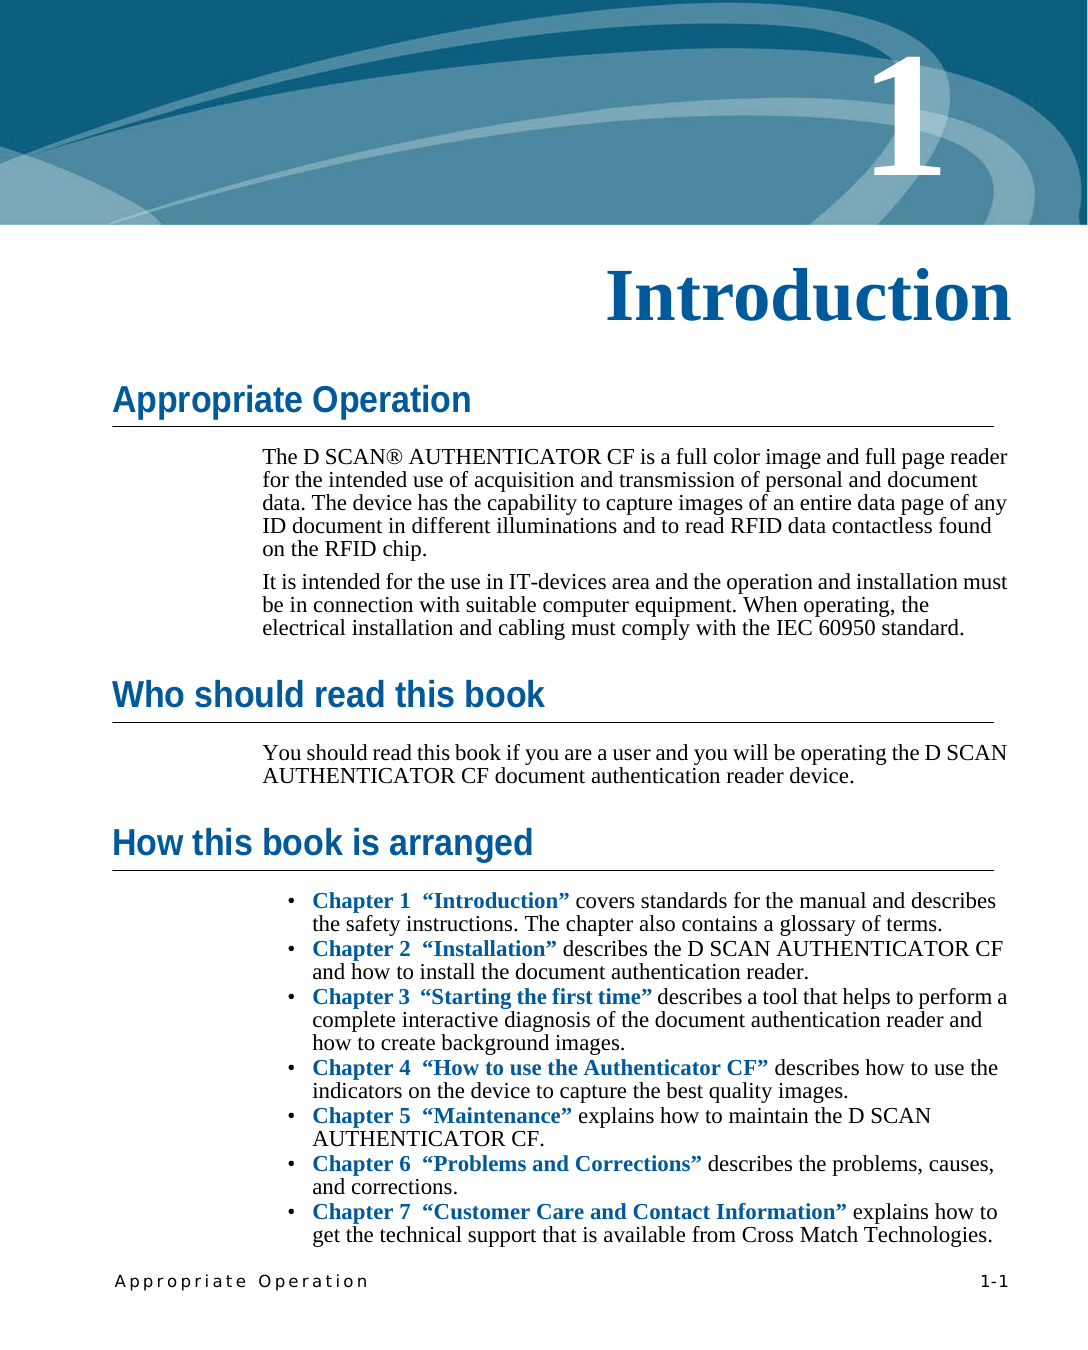 Appropriate Operation   1-11Chapter 0IntroductionAppropriate OperationThe D SCAN® AUTHENTICATOR CF is a full color image and full page reader for the intended use of acquisition and transmission of personal and document data. The device has the capability to capture images of an entire data page of any ID document in different illuminations and to read RFID data contactless found on the RFID chip.It is intended for the use in IT-devices area and the operation and installation must be in connection with suitable computer equipment. When operating, the electrical installation and cabling must comply with the IEC 60950 standard.Who should read this bookYou should read this book if you are a user and you will be operating the D SCAN AUTHENTICATOR CF document authentication reader device.How this book is arranged•Chapter 1  “Introduction” covers standards for the manual and describes the safety instructions. The chapter also contains a glossary of terms.•Chapter 2  “Installation” describes the D SCAN AUTHENTICATOR CF and how to install the document authentication reader.•Chapter 3  “Starting the first time” describes a tool that helps to perform a complete interactive diagnosis of the document authentication reader and how to create background images.•Chapter 4  “How to use the Authenticator CF” describes how to use the indicators on the device to capture the best quality images.•Chapter 5  “Maintenance” explains how to maintain the D SCAN AUTHENTICATOR CF.•Chapter 6  “Problems and Corrections” describes the problems, causes, and corrections.•Chapter 7  “Customer Care and Contact Information” explains how to get the technical support that is available from Cross Match Technologies.